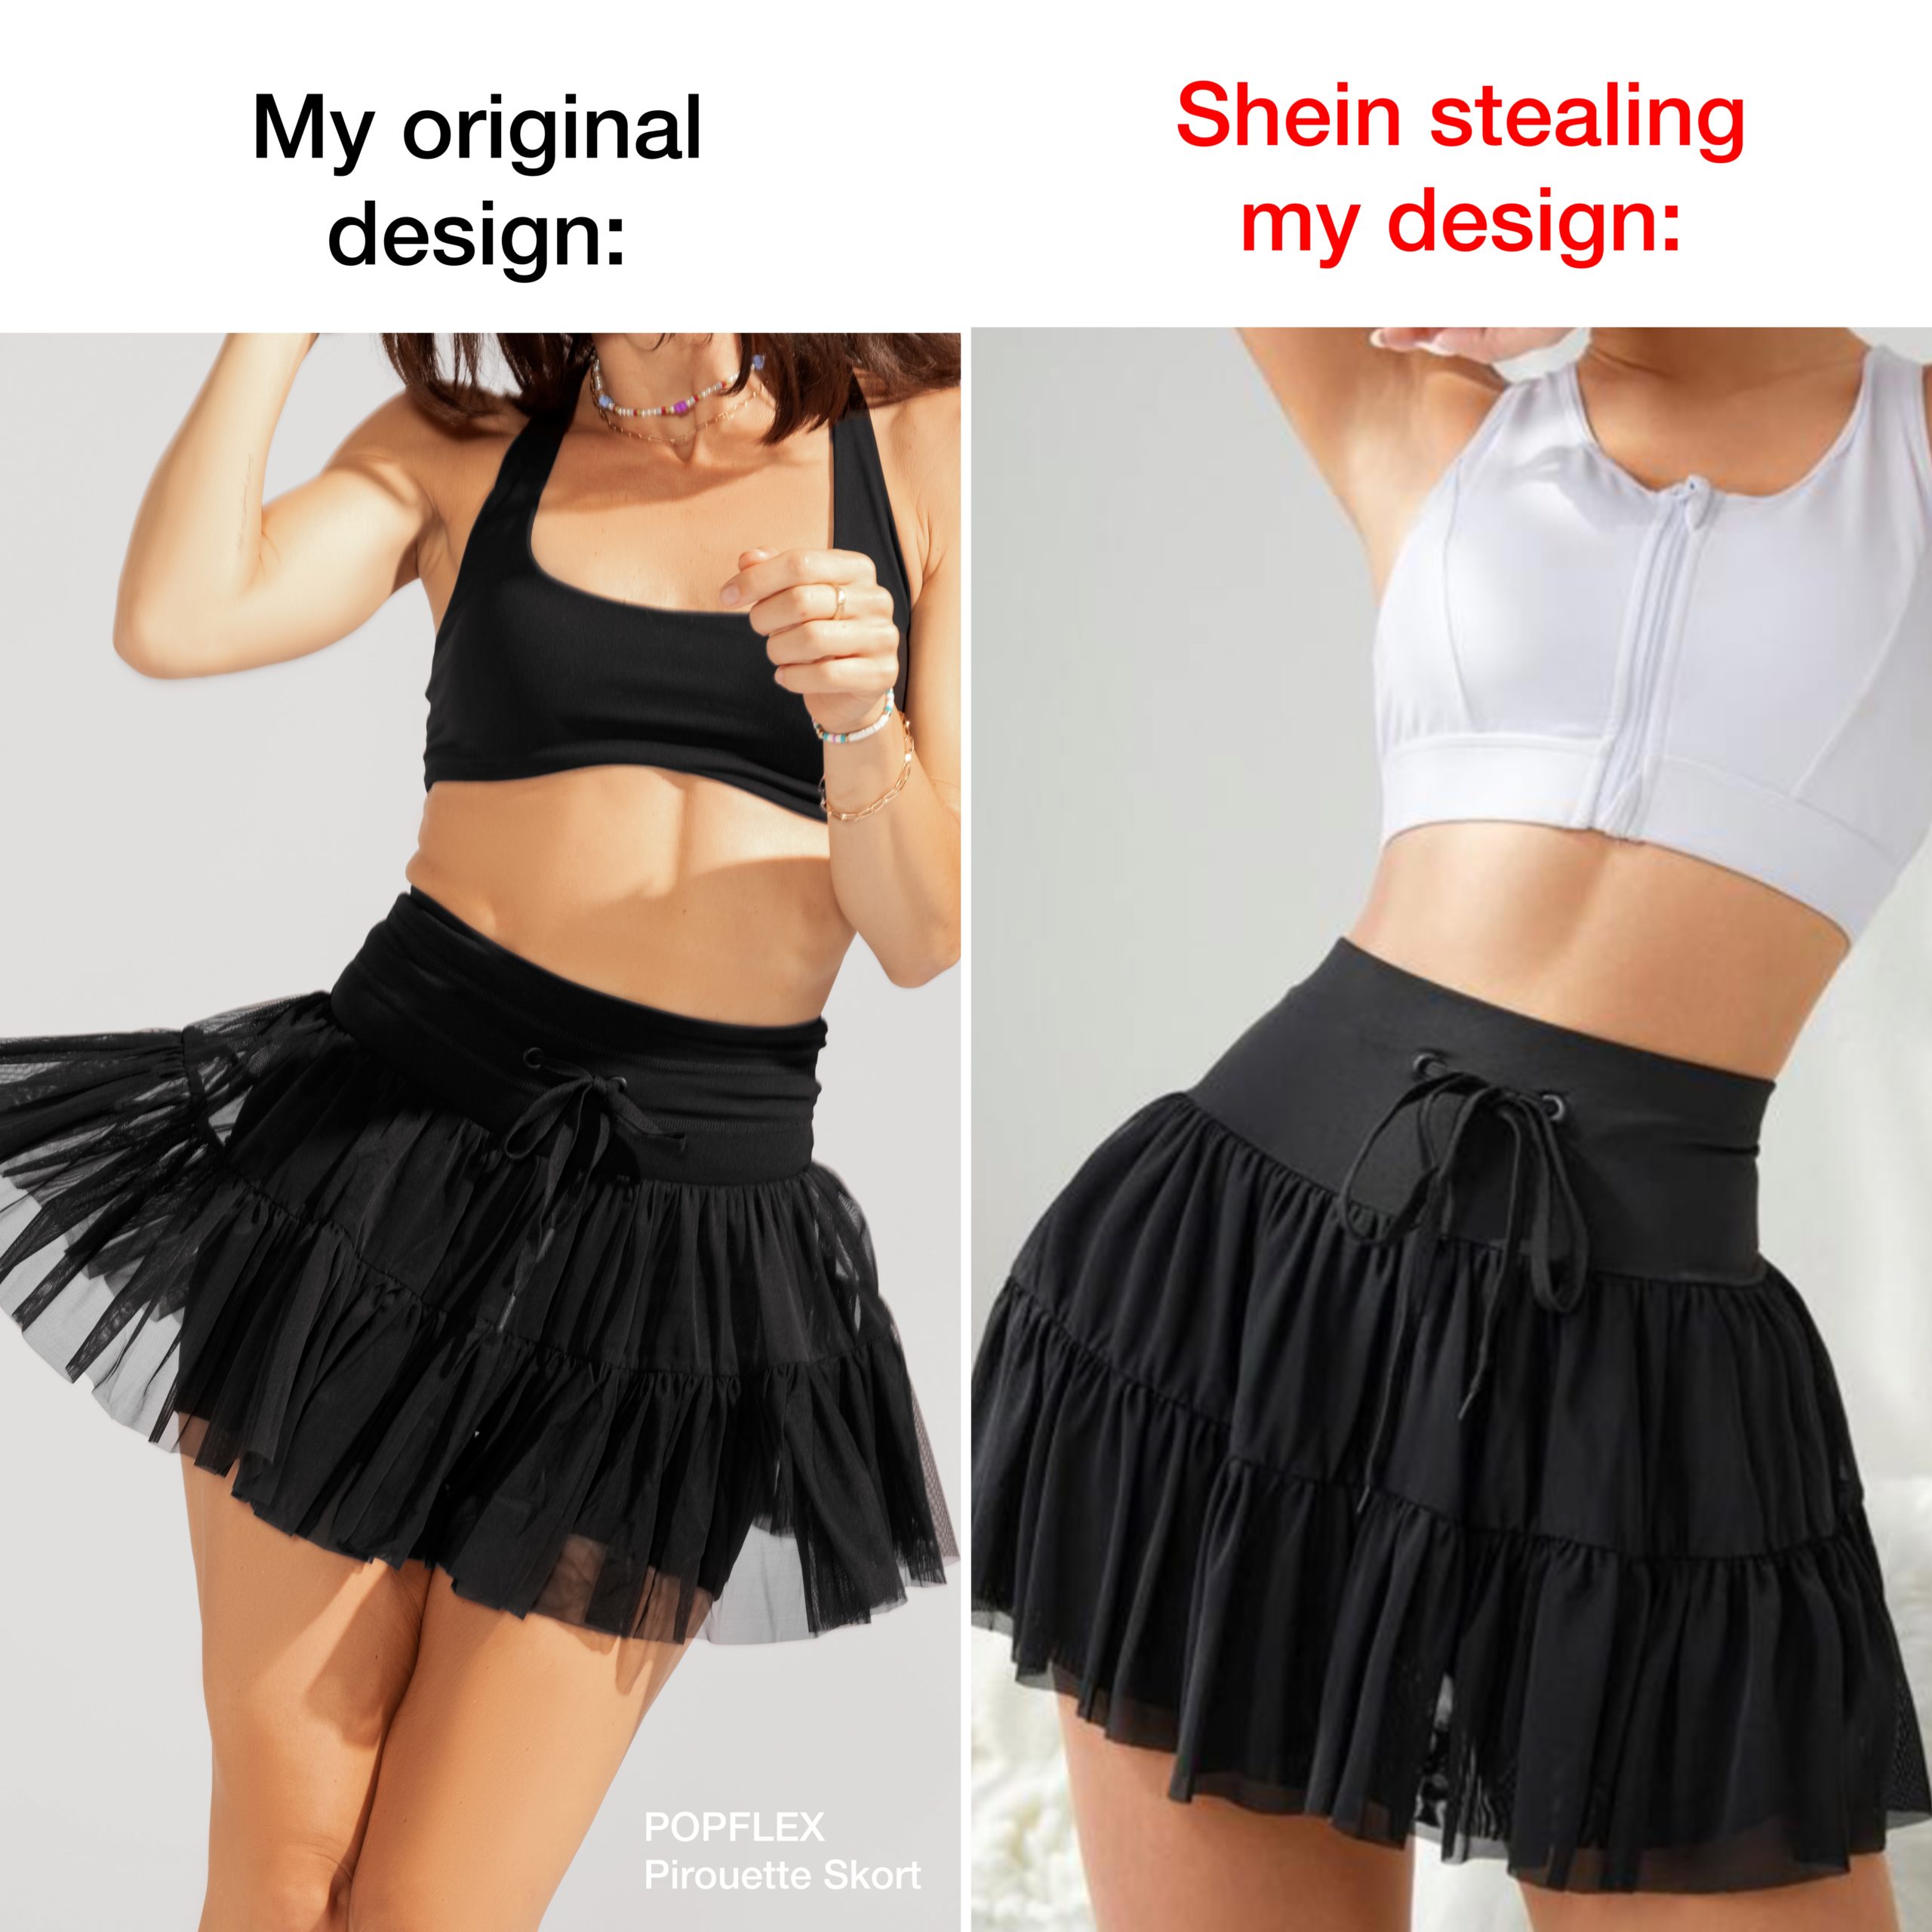 Shein stole my design so I'm spilling all the tea and it's PIPING